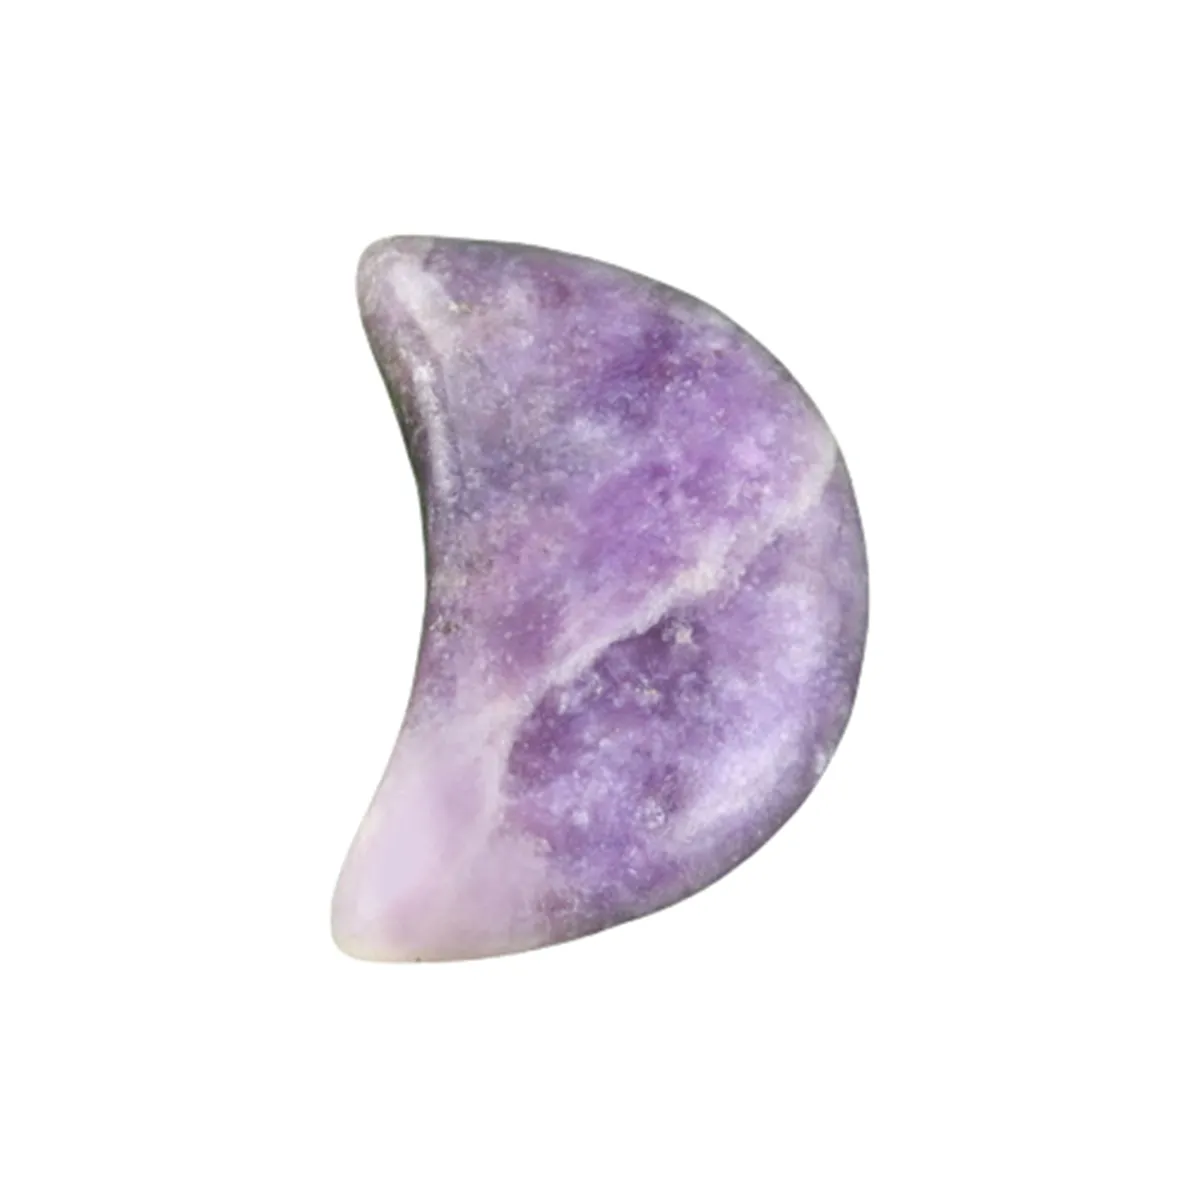 Wholesale Natural Lepidolite Moon Stone Small Pendant 20 mm Fit For DIY Jewelry Making Design Pendant Necklace Moon Jewelry